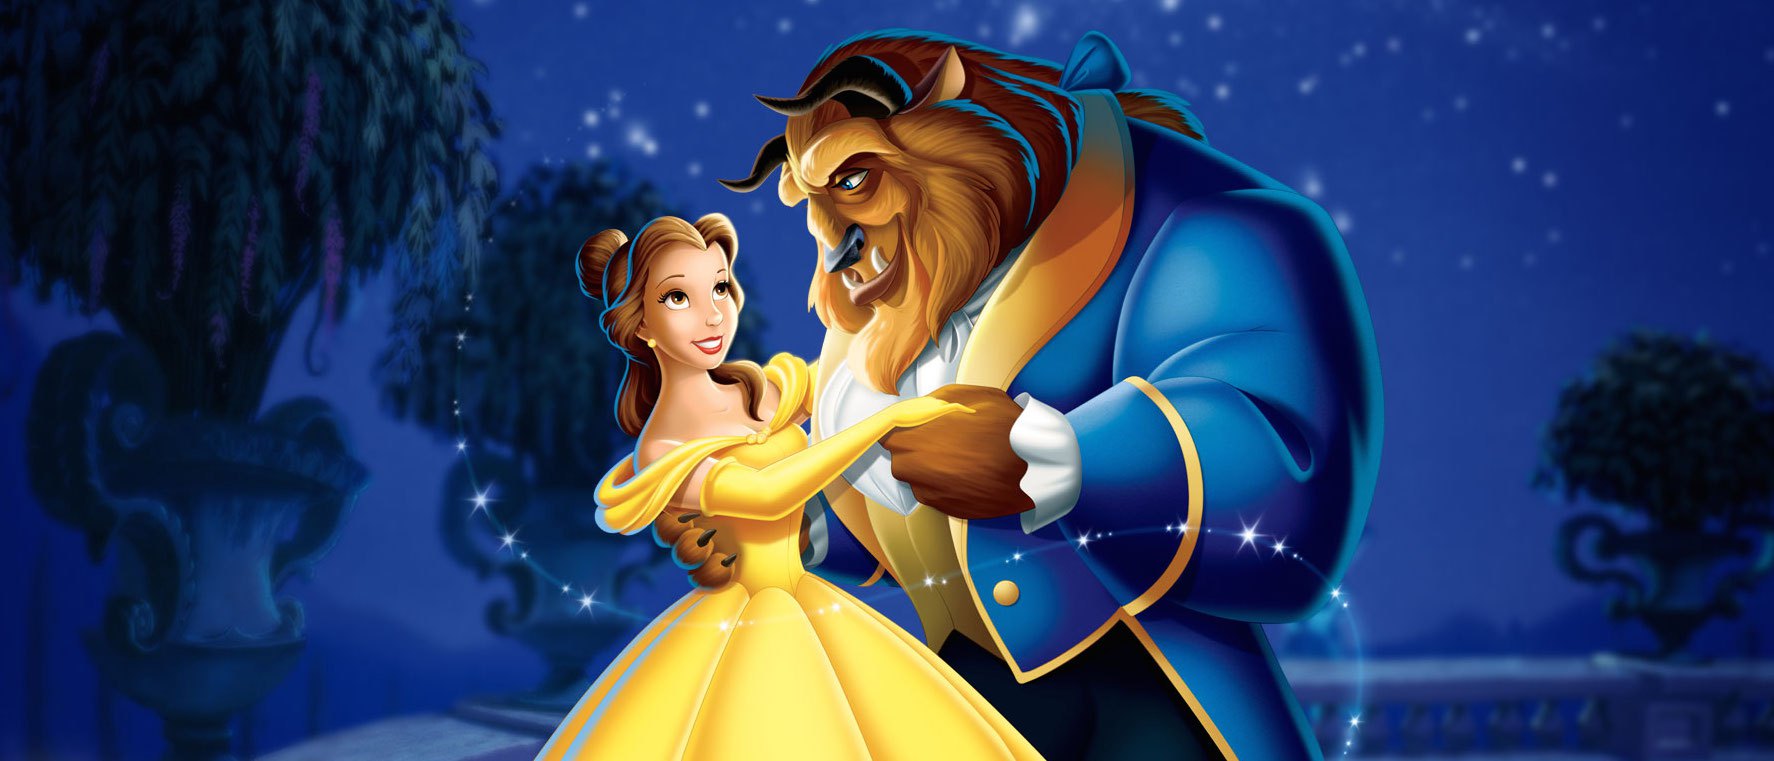 Why We All Need To Love Like Beauty And The Beast | Thought Catalog